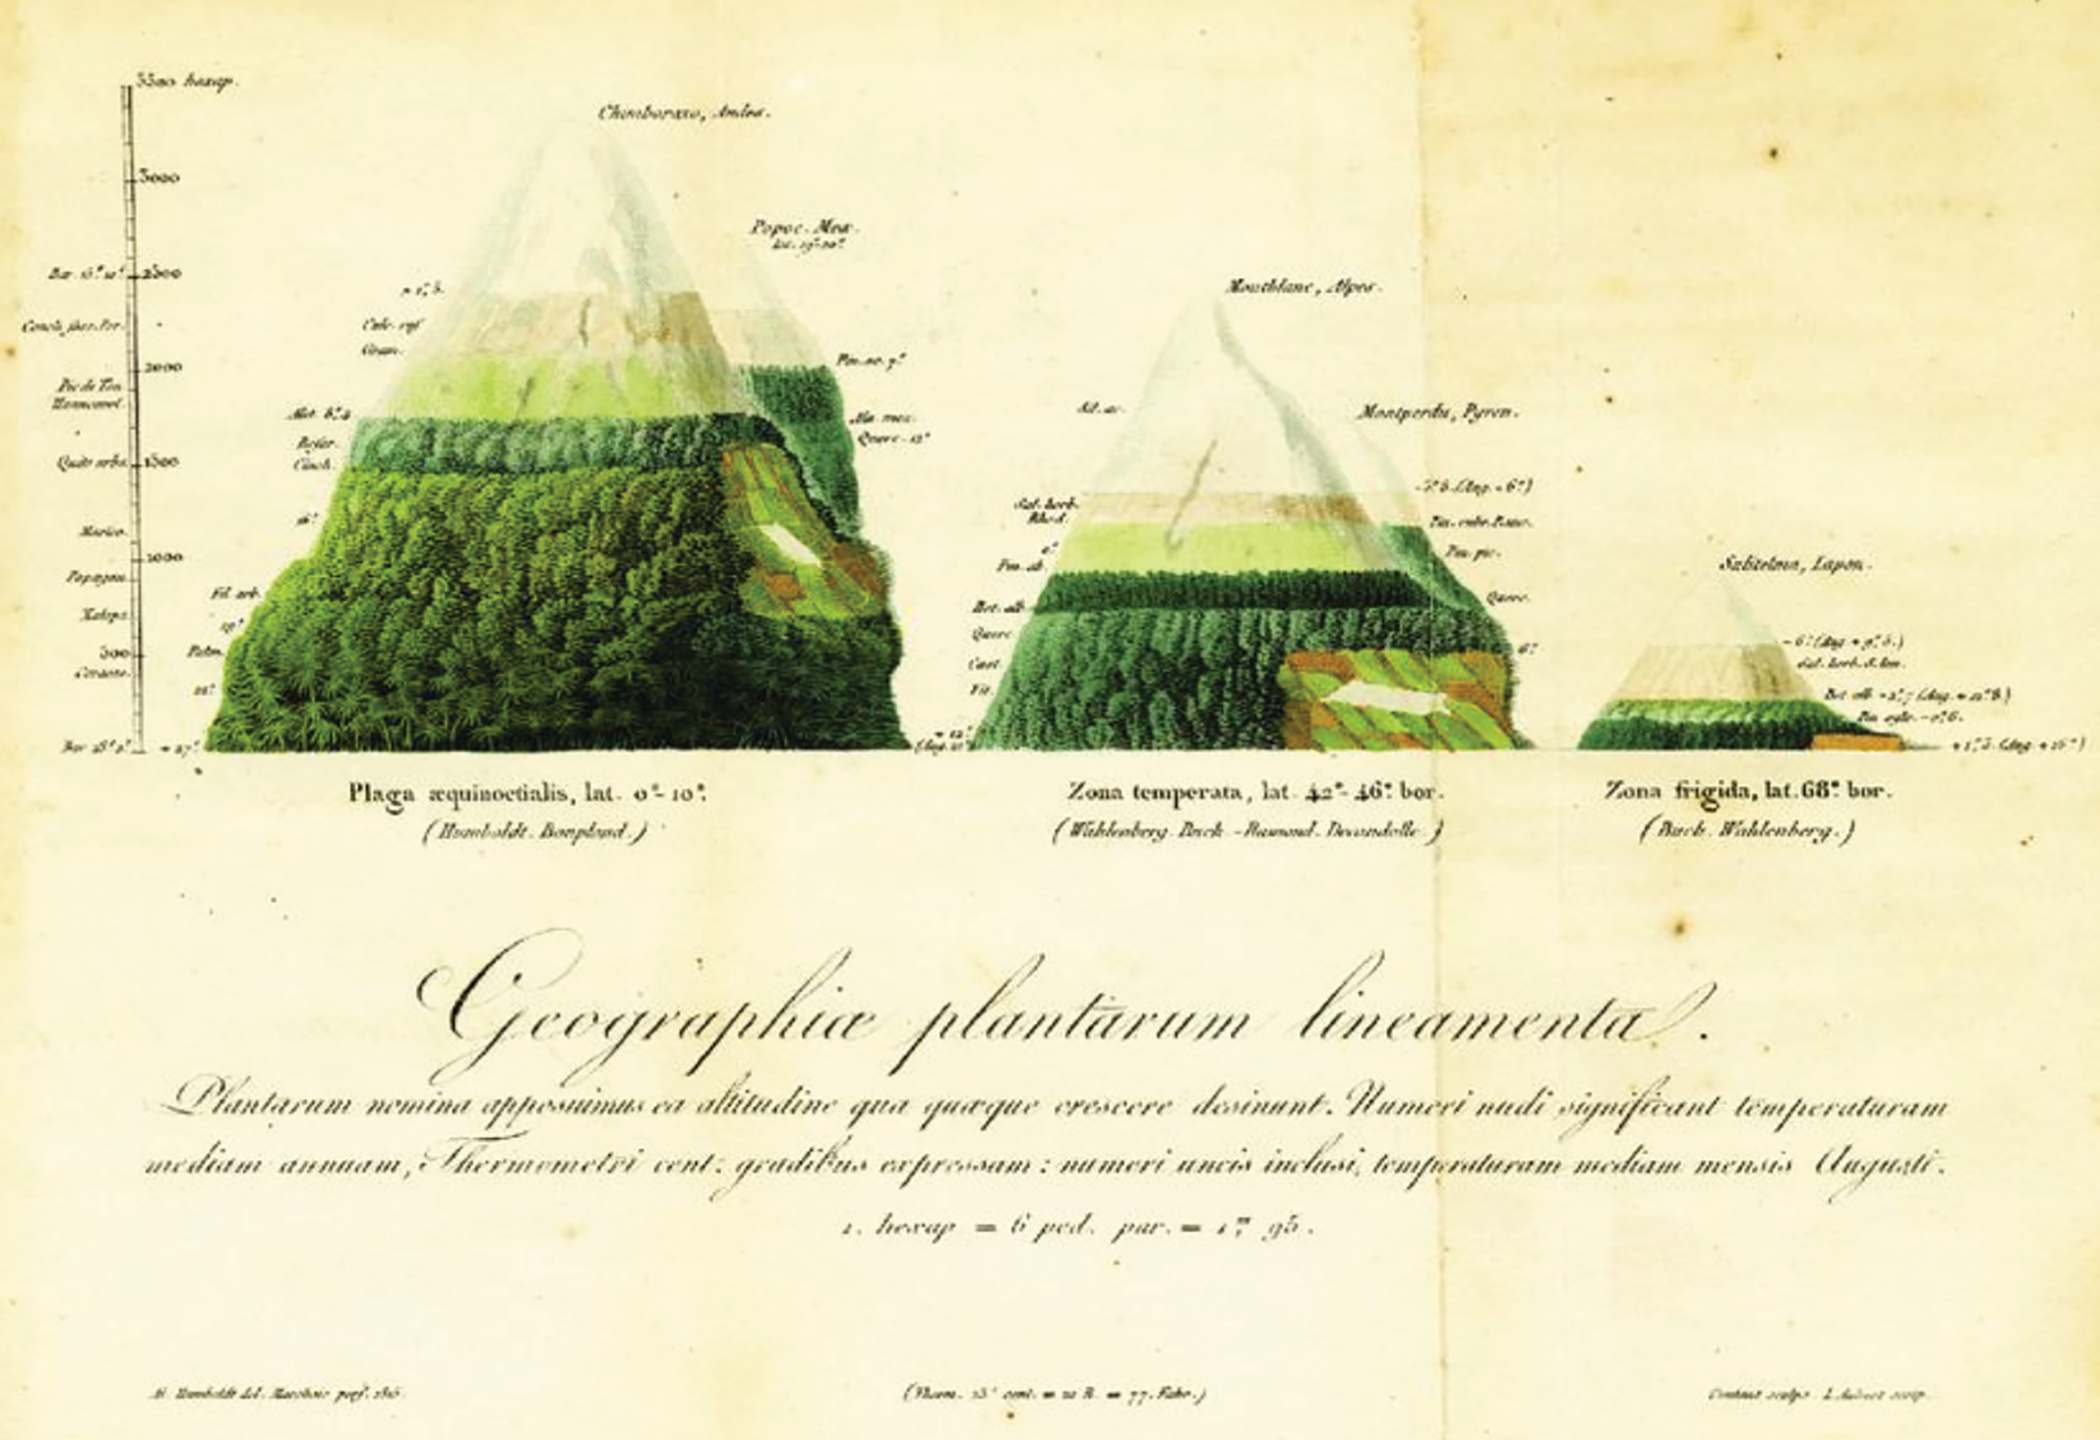  “Lines of the geography of plants,” from De distributione plantarum (On the Distribution of Plants) by Alexander von Humboldt, 1817. 